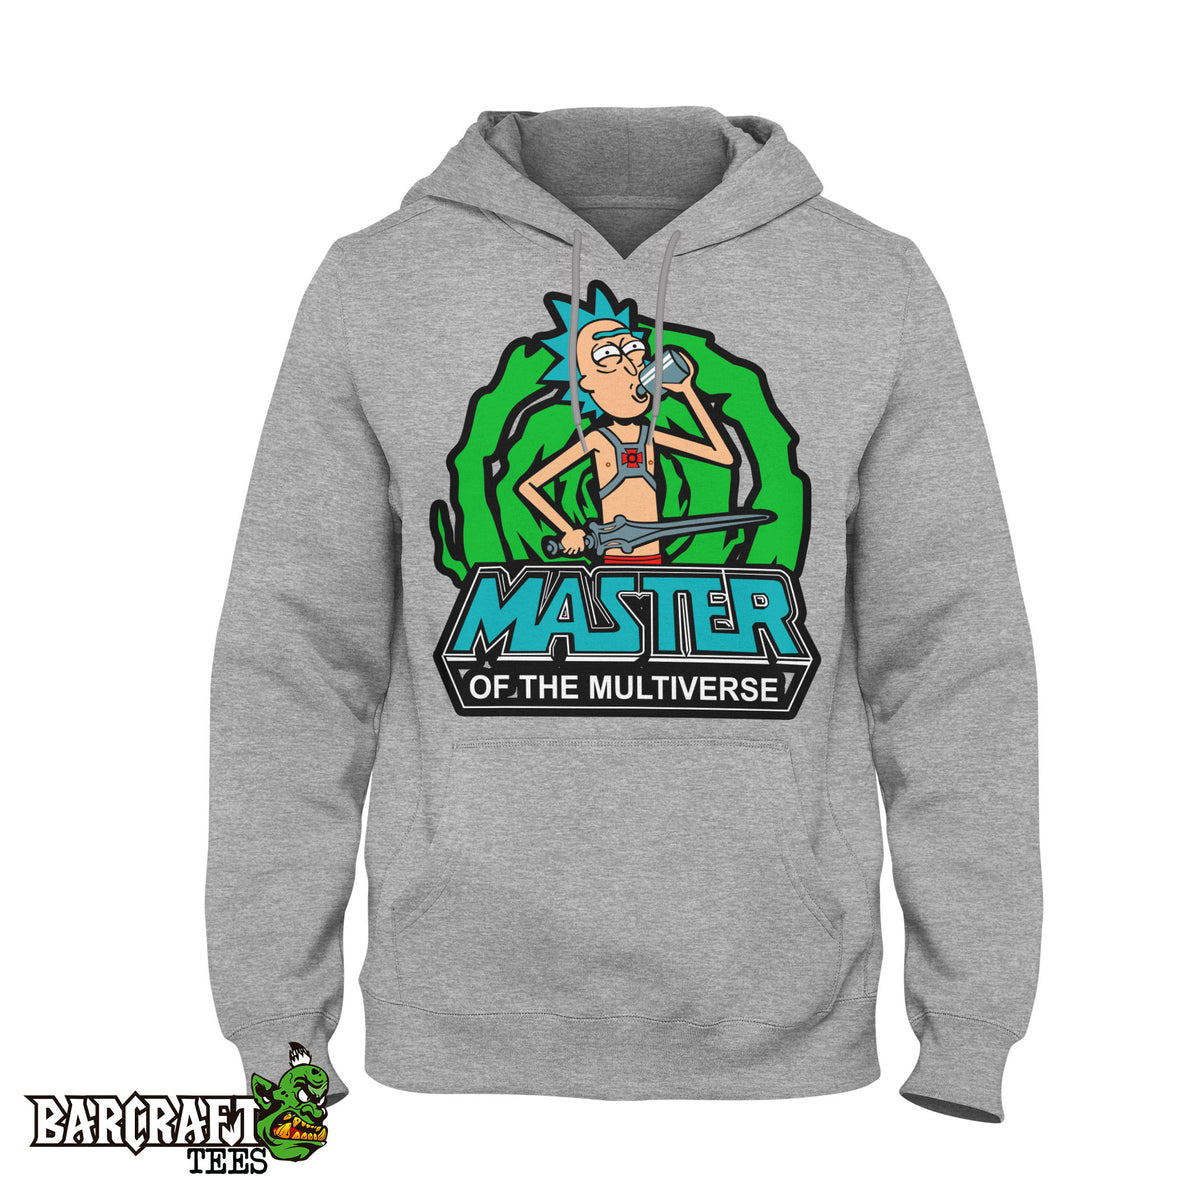 Master of the Multiverse Hoodie